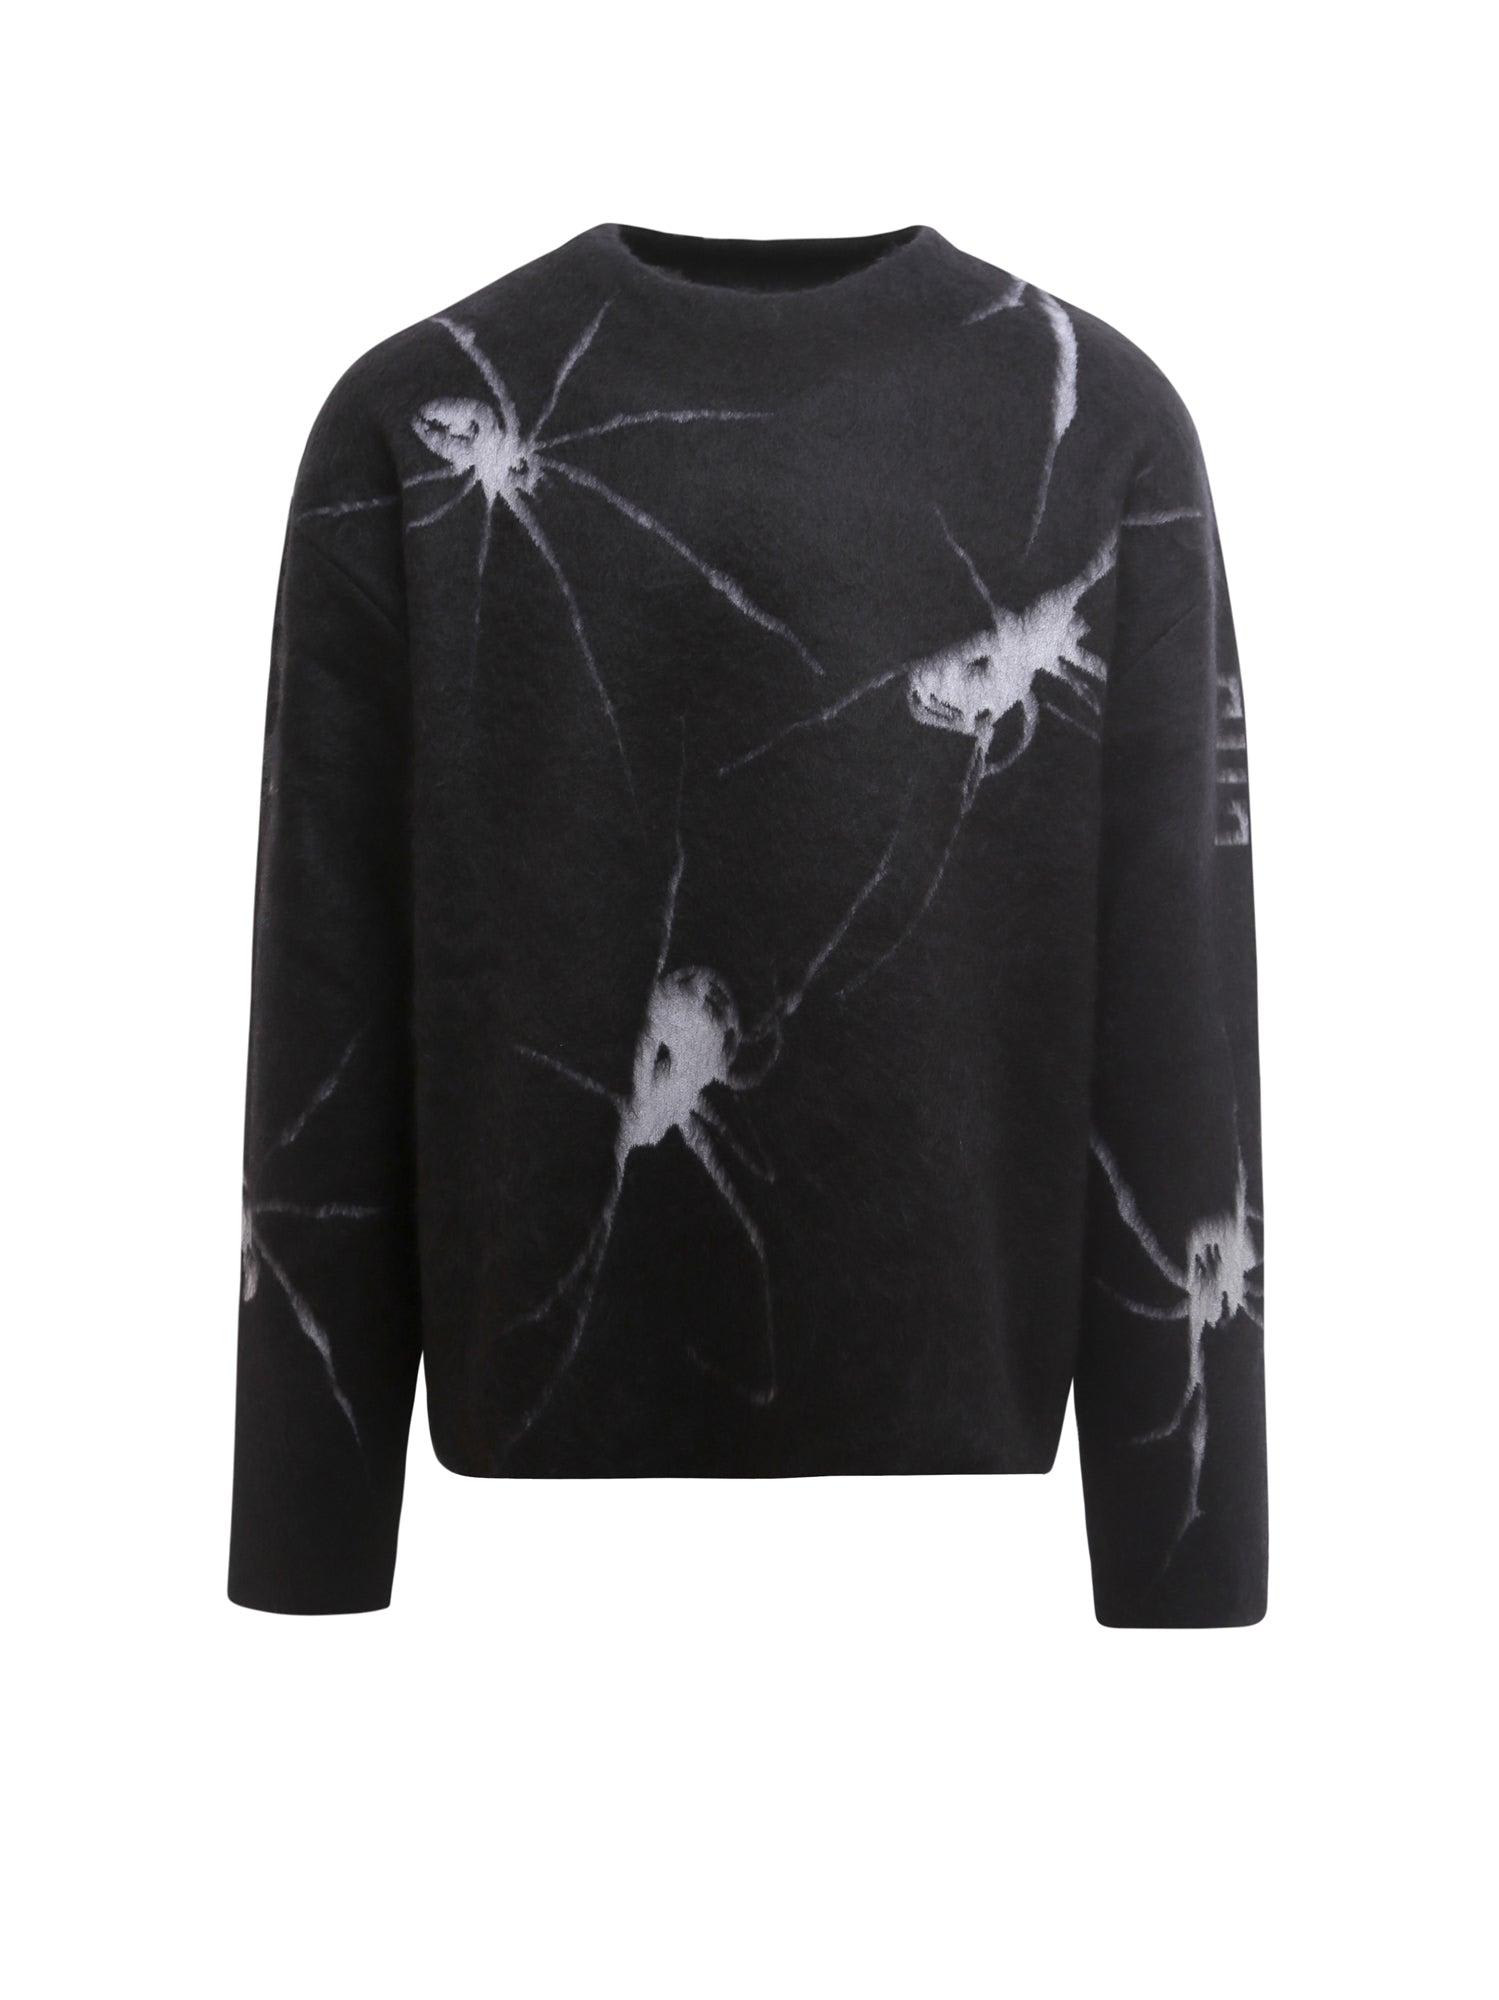 Givenchy Patterned Crewneck Sweater